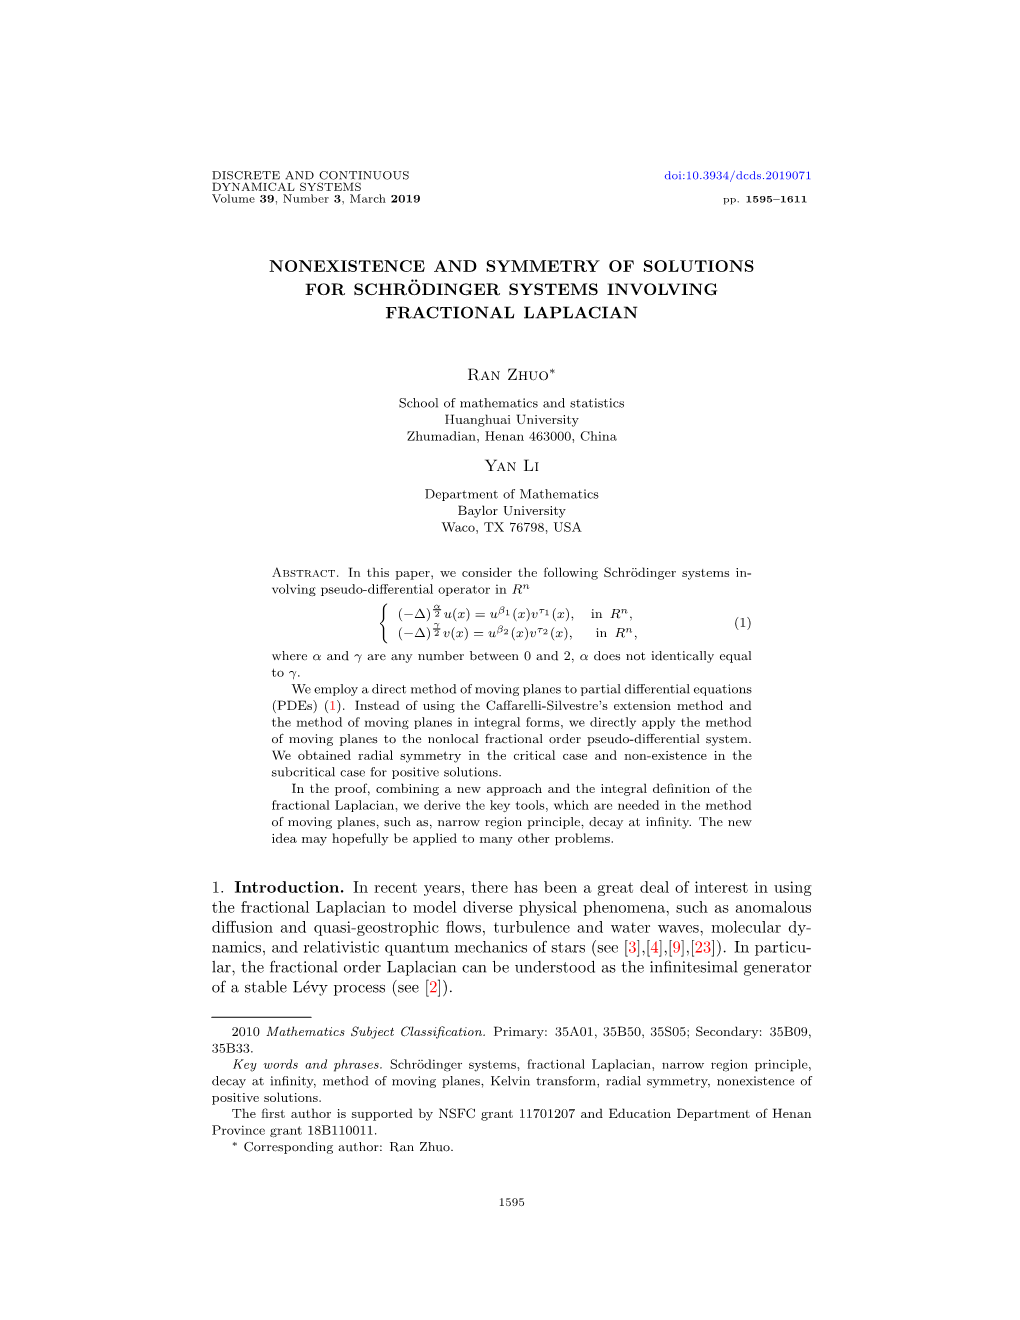 Nonexistence and Symmetry of Solutions for Schrodinger¨ Systems Involving Fractional Laplacian